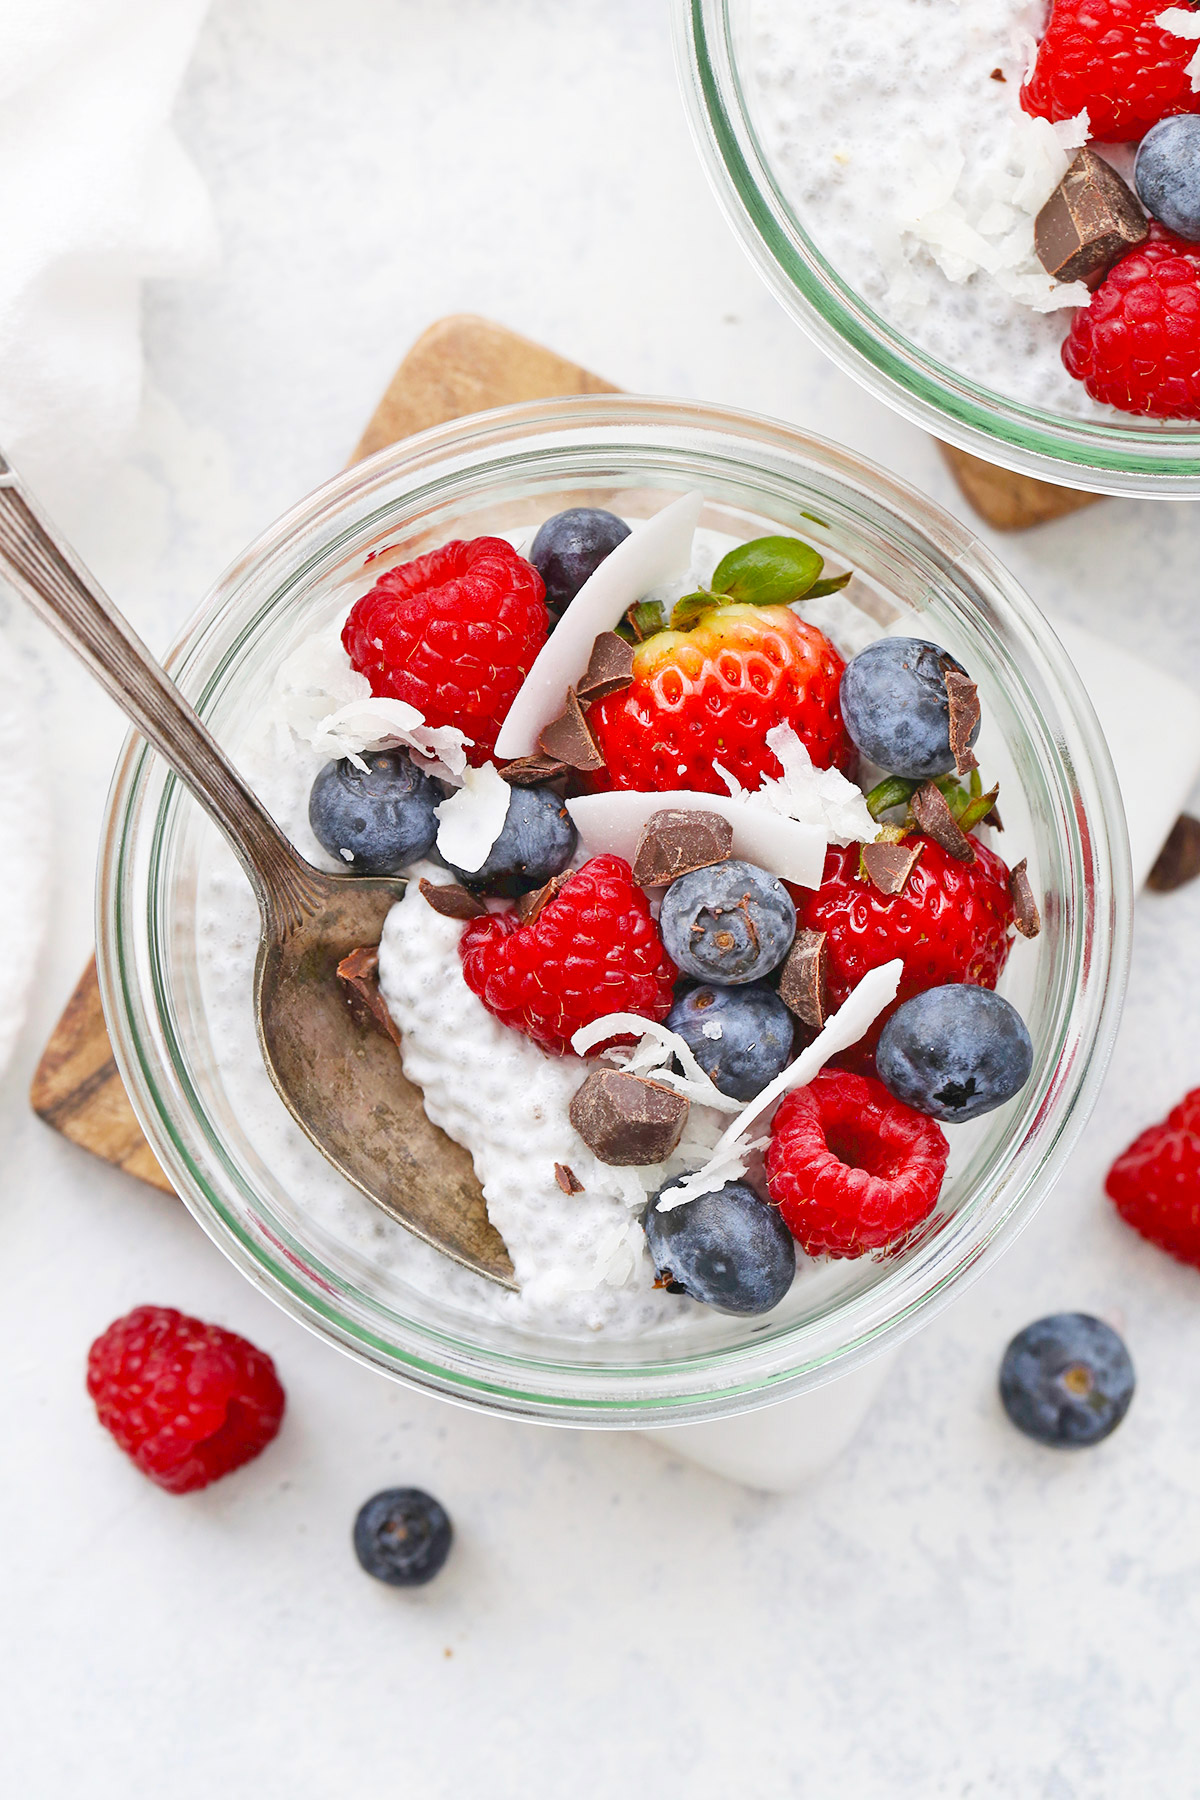 Coconut Chia Pudding from One Lovely Life